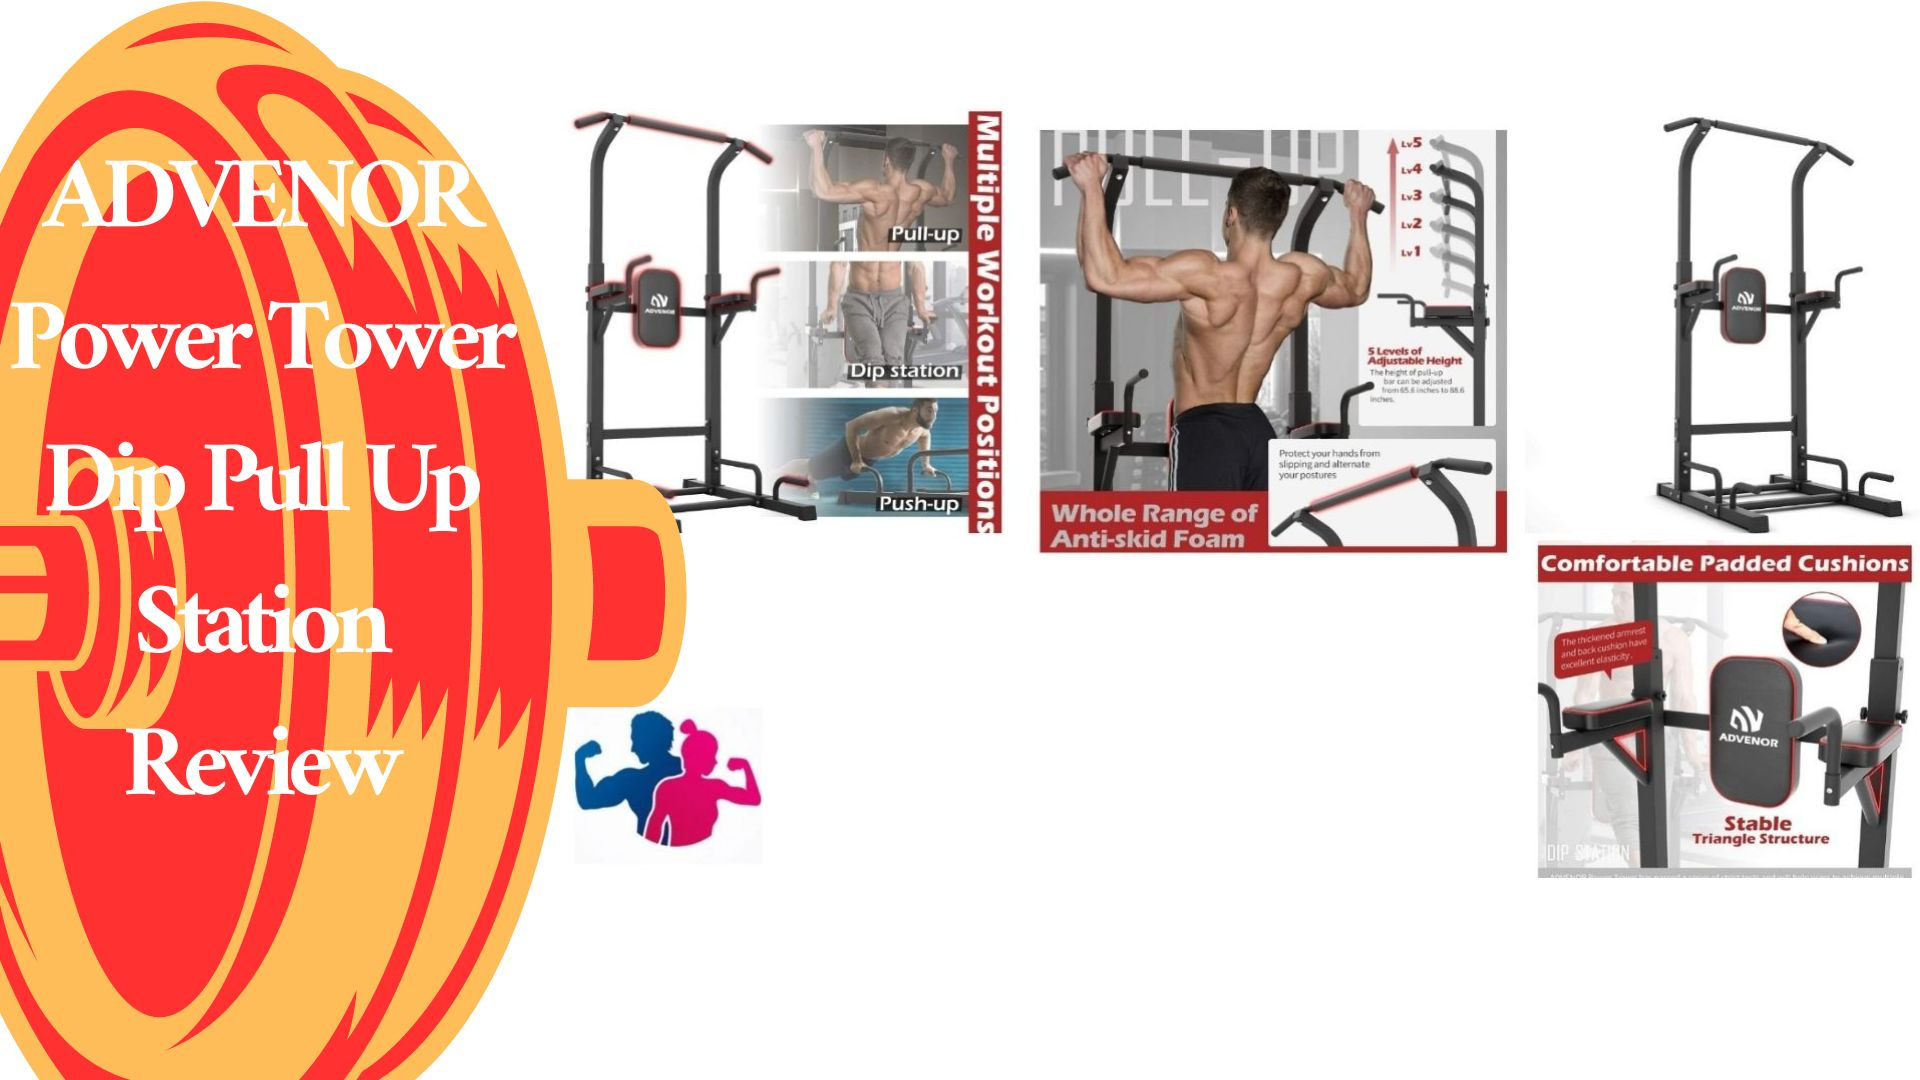 ADVENOR Power Tower Dip Pull Up Station Review